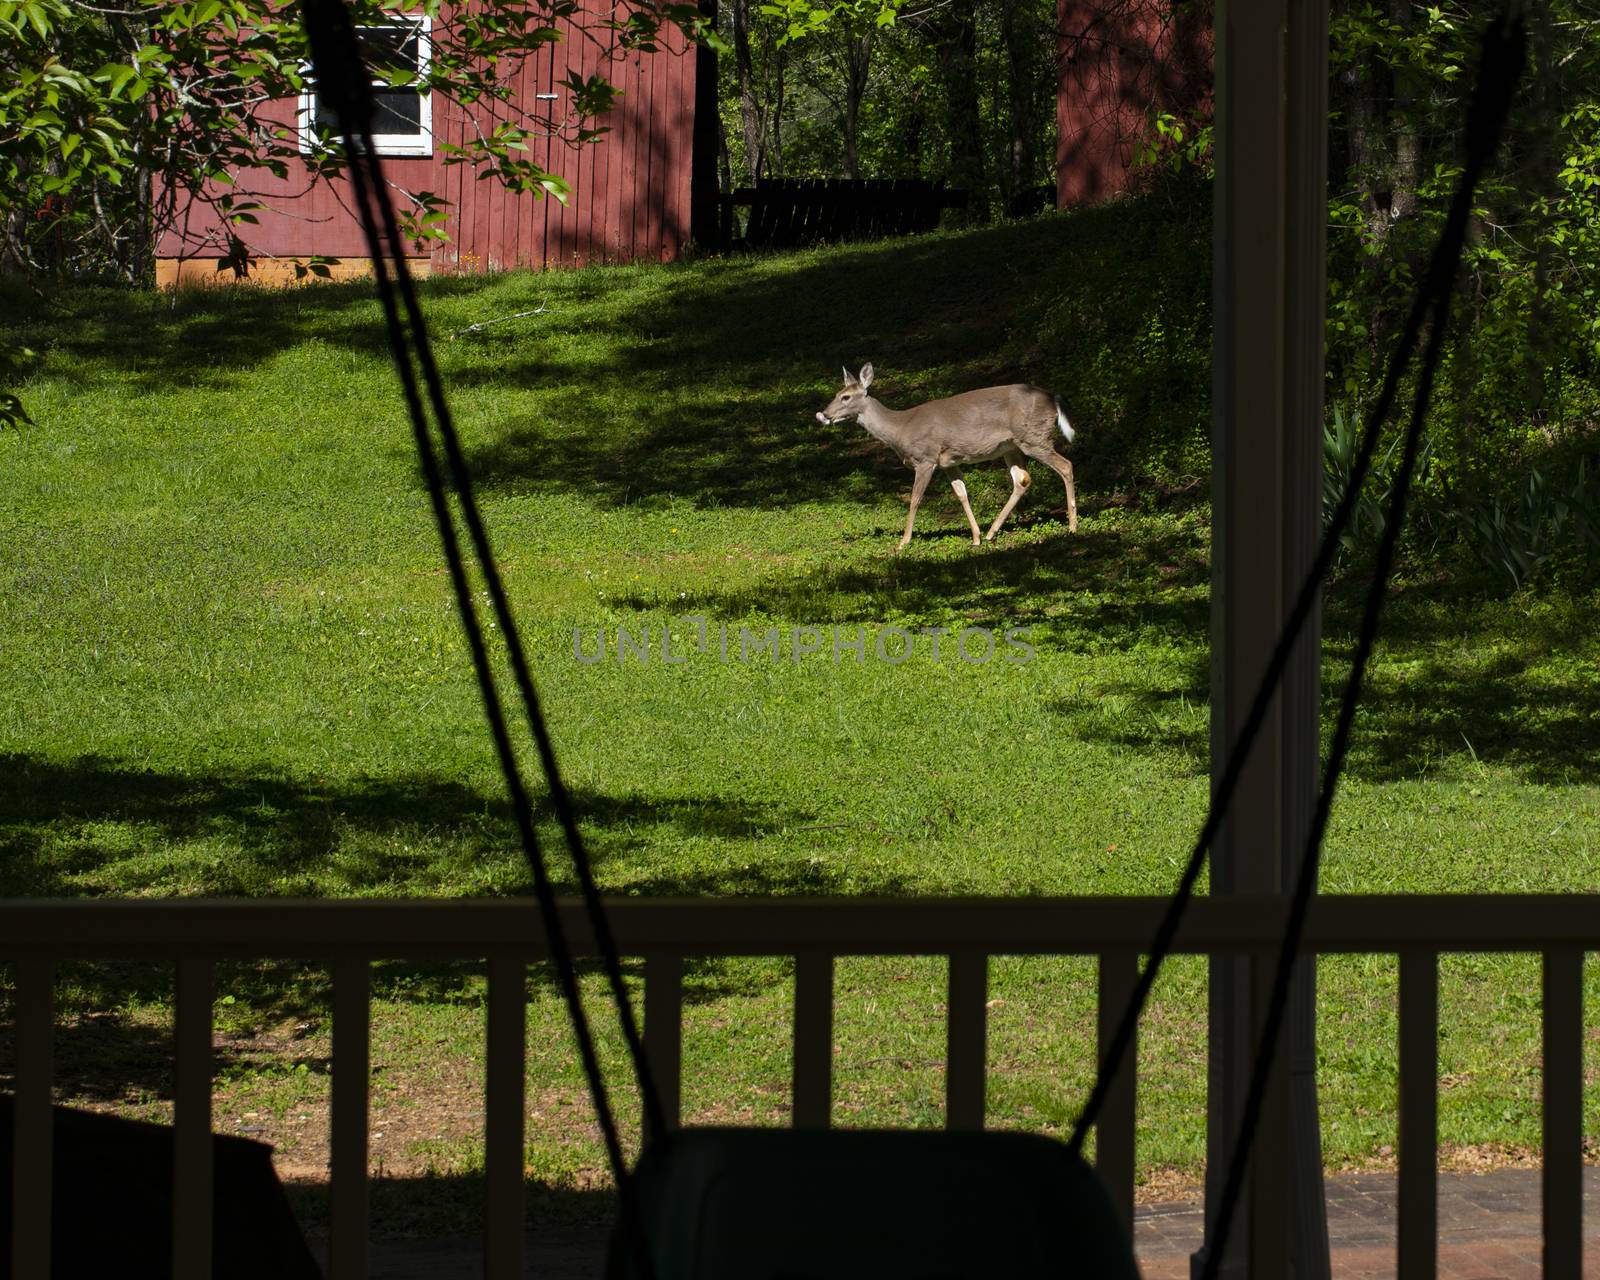 White-tailed deer emerges from the woods near a red barn into a bright spring afternoon.